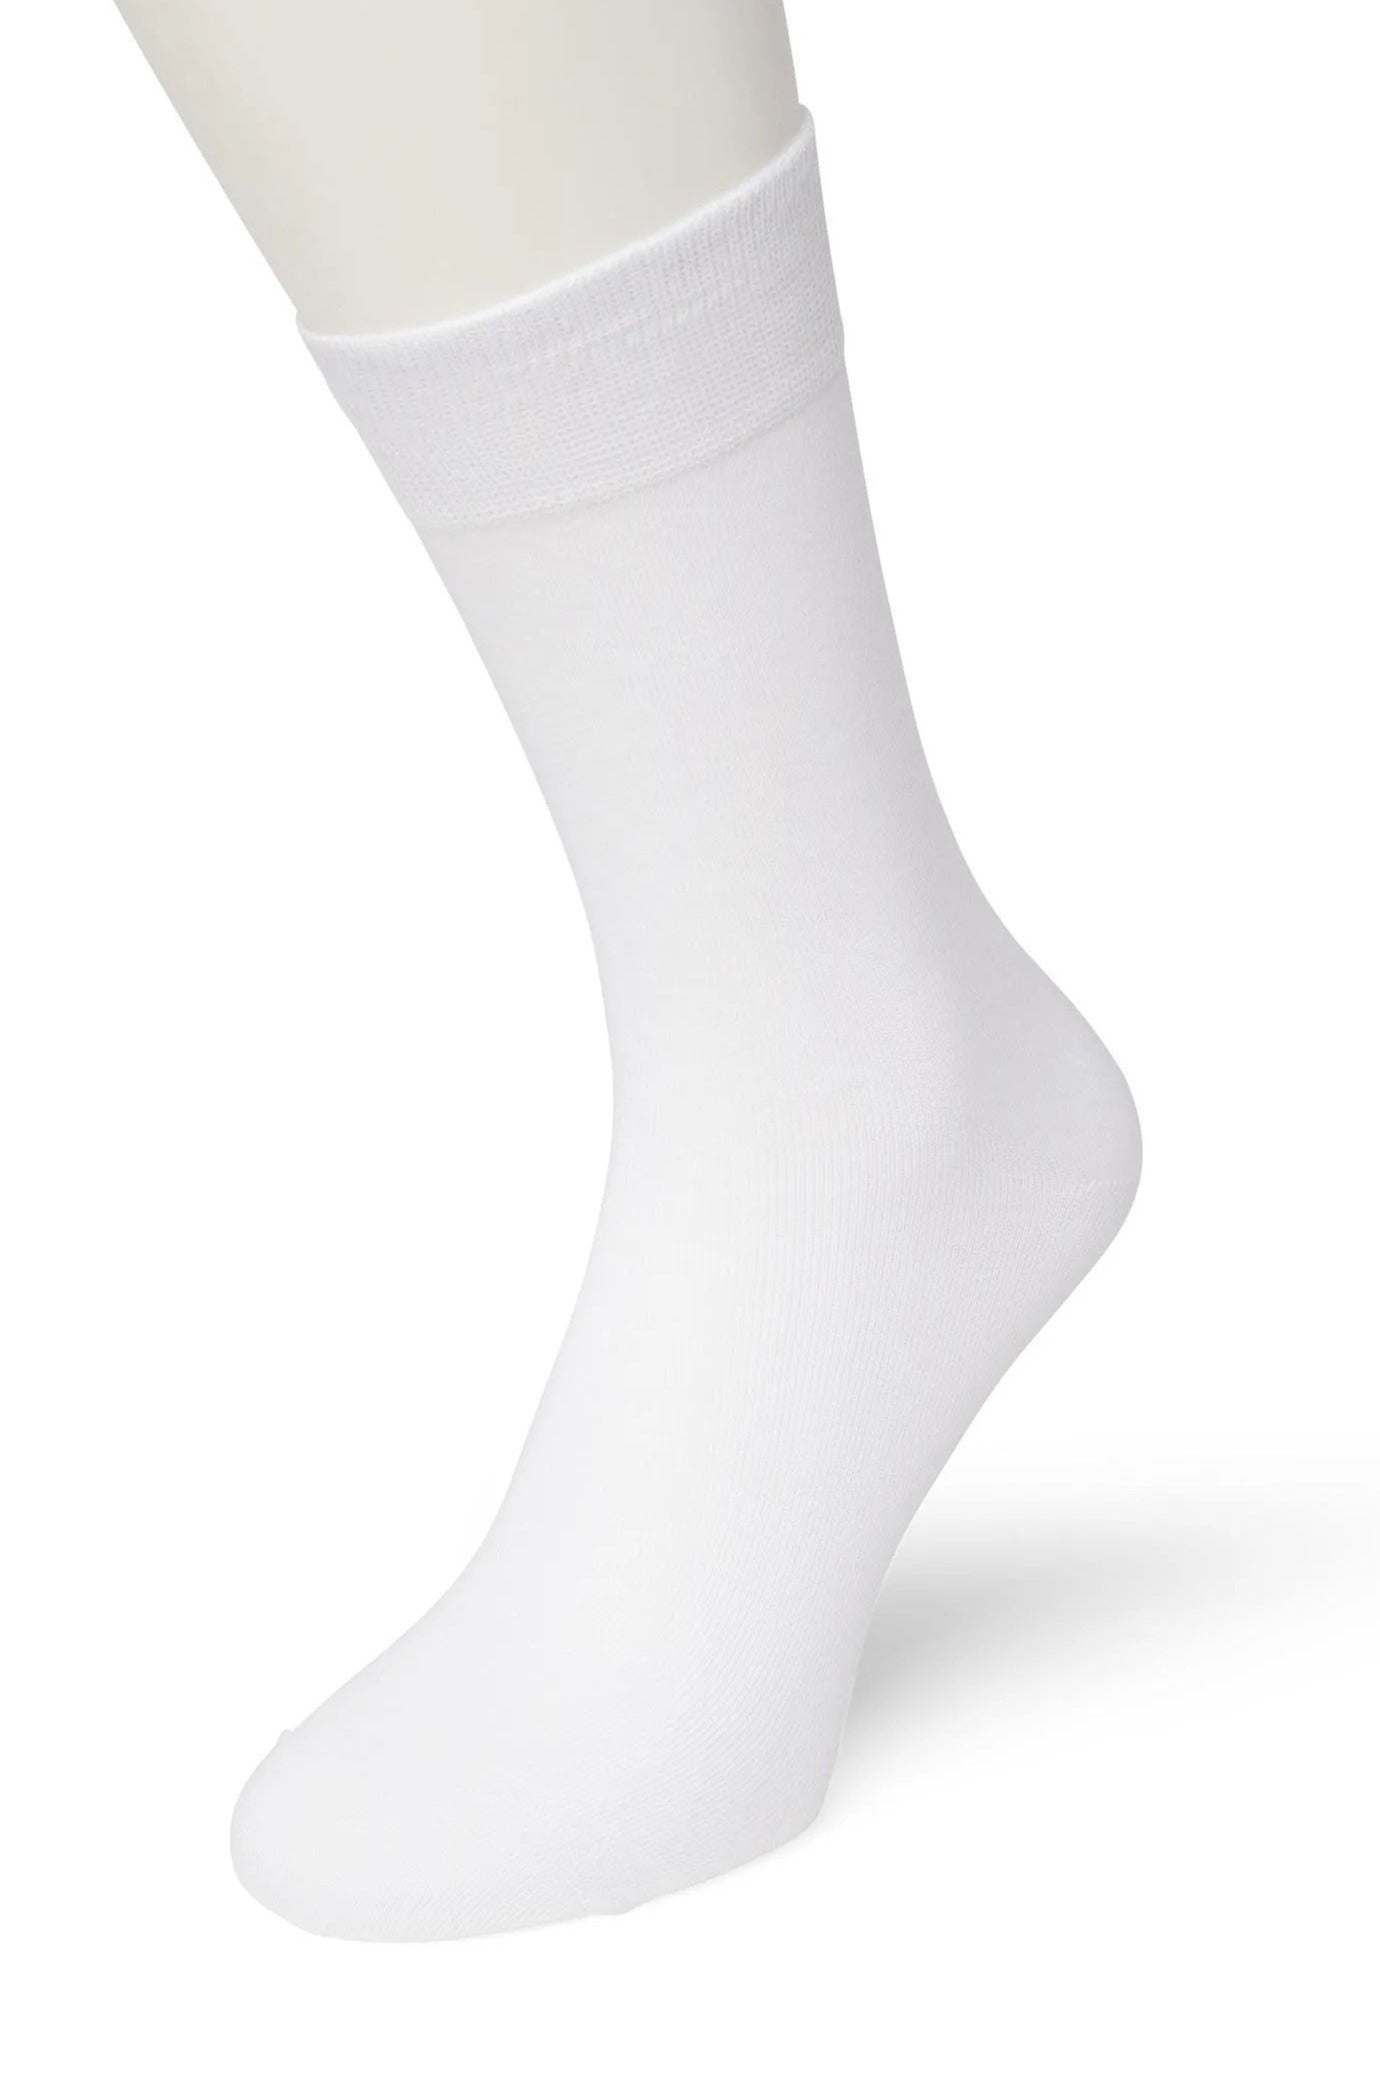 Bonnie Doon 83422 Cotton Sock - white ankle socks available in women sizes